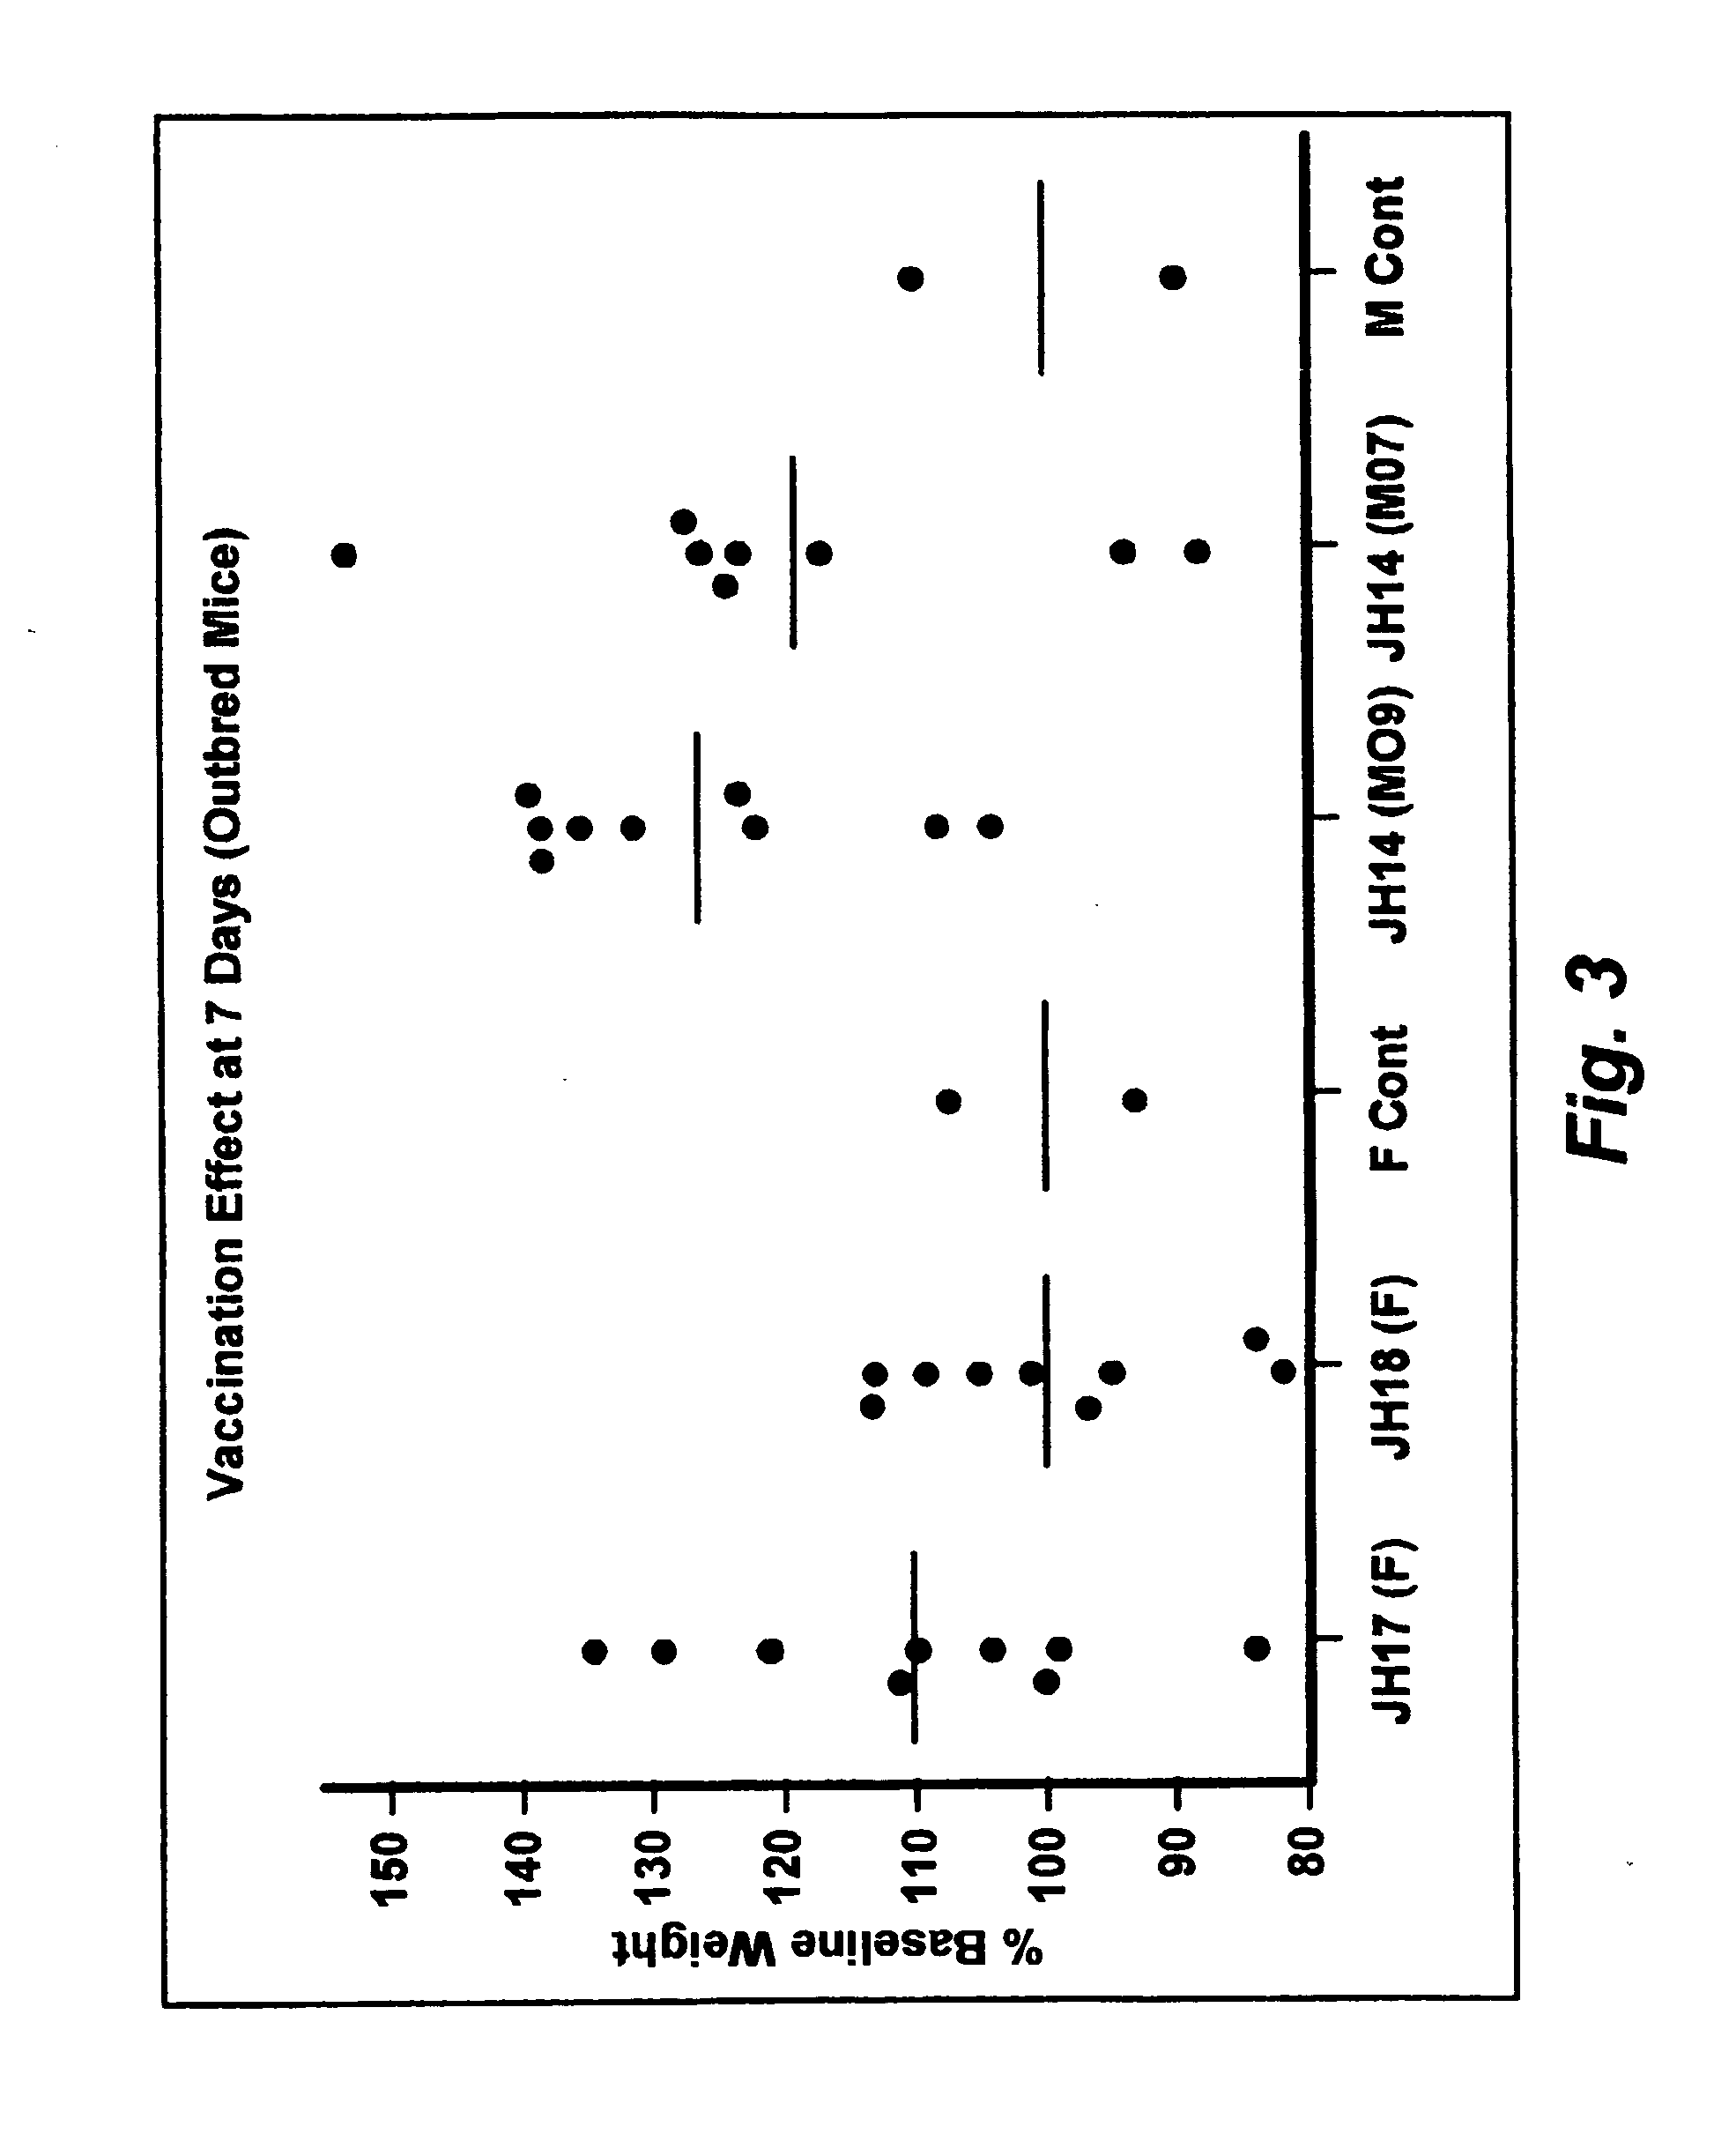 Compositions and Methods for Enhanced Somatostatin Immunogenicity in the Treatment of Growth Hormone and Insulin-Like Growth Factor One Deficiency